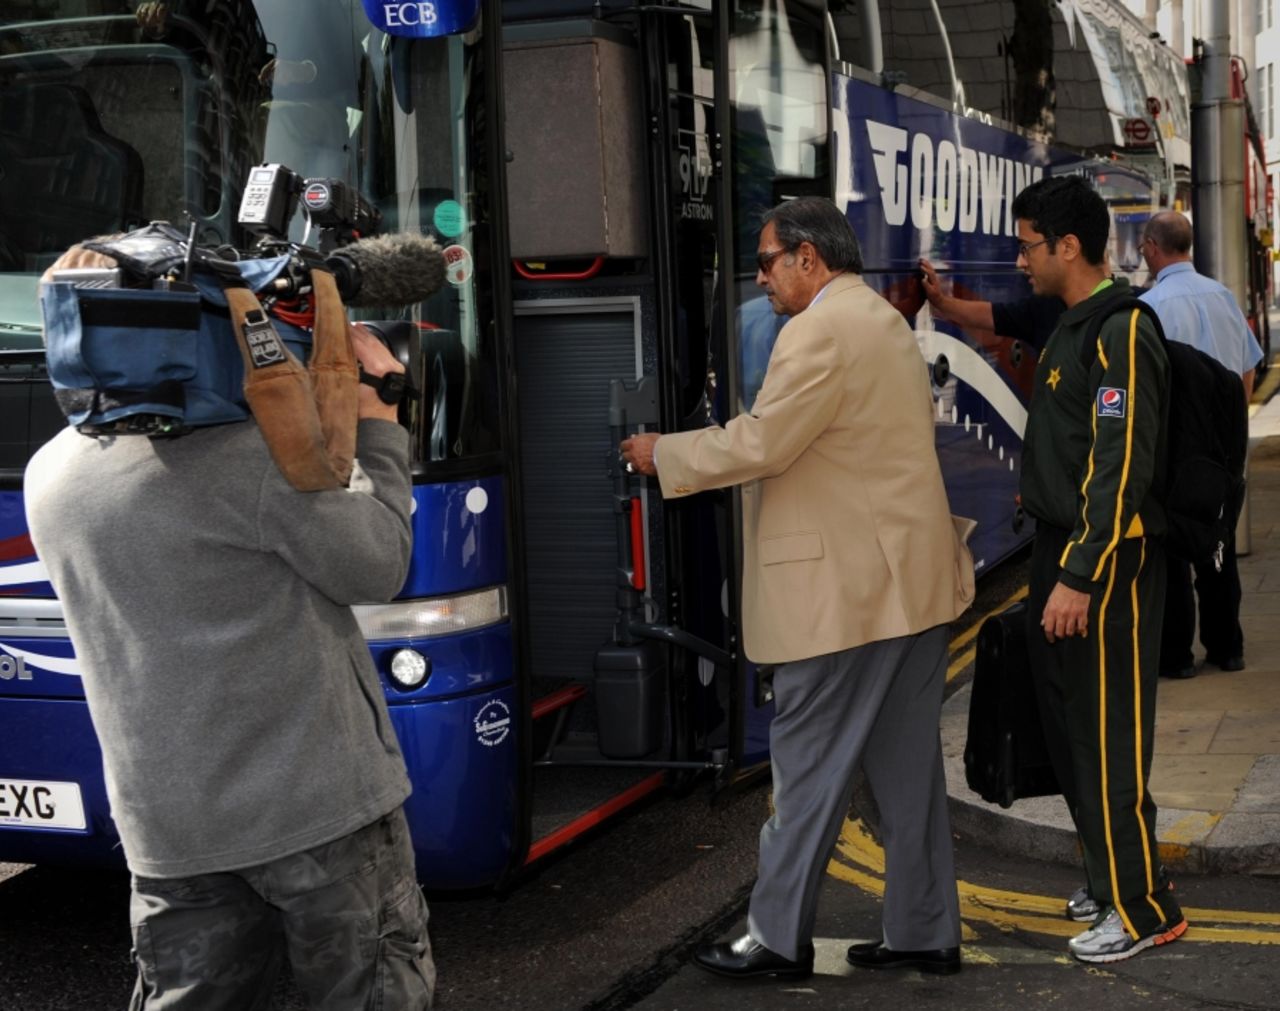 Pakistan team manager Yawar Saeed boards the team bus in London, September 21 2010